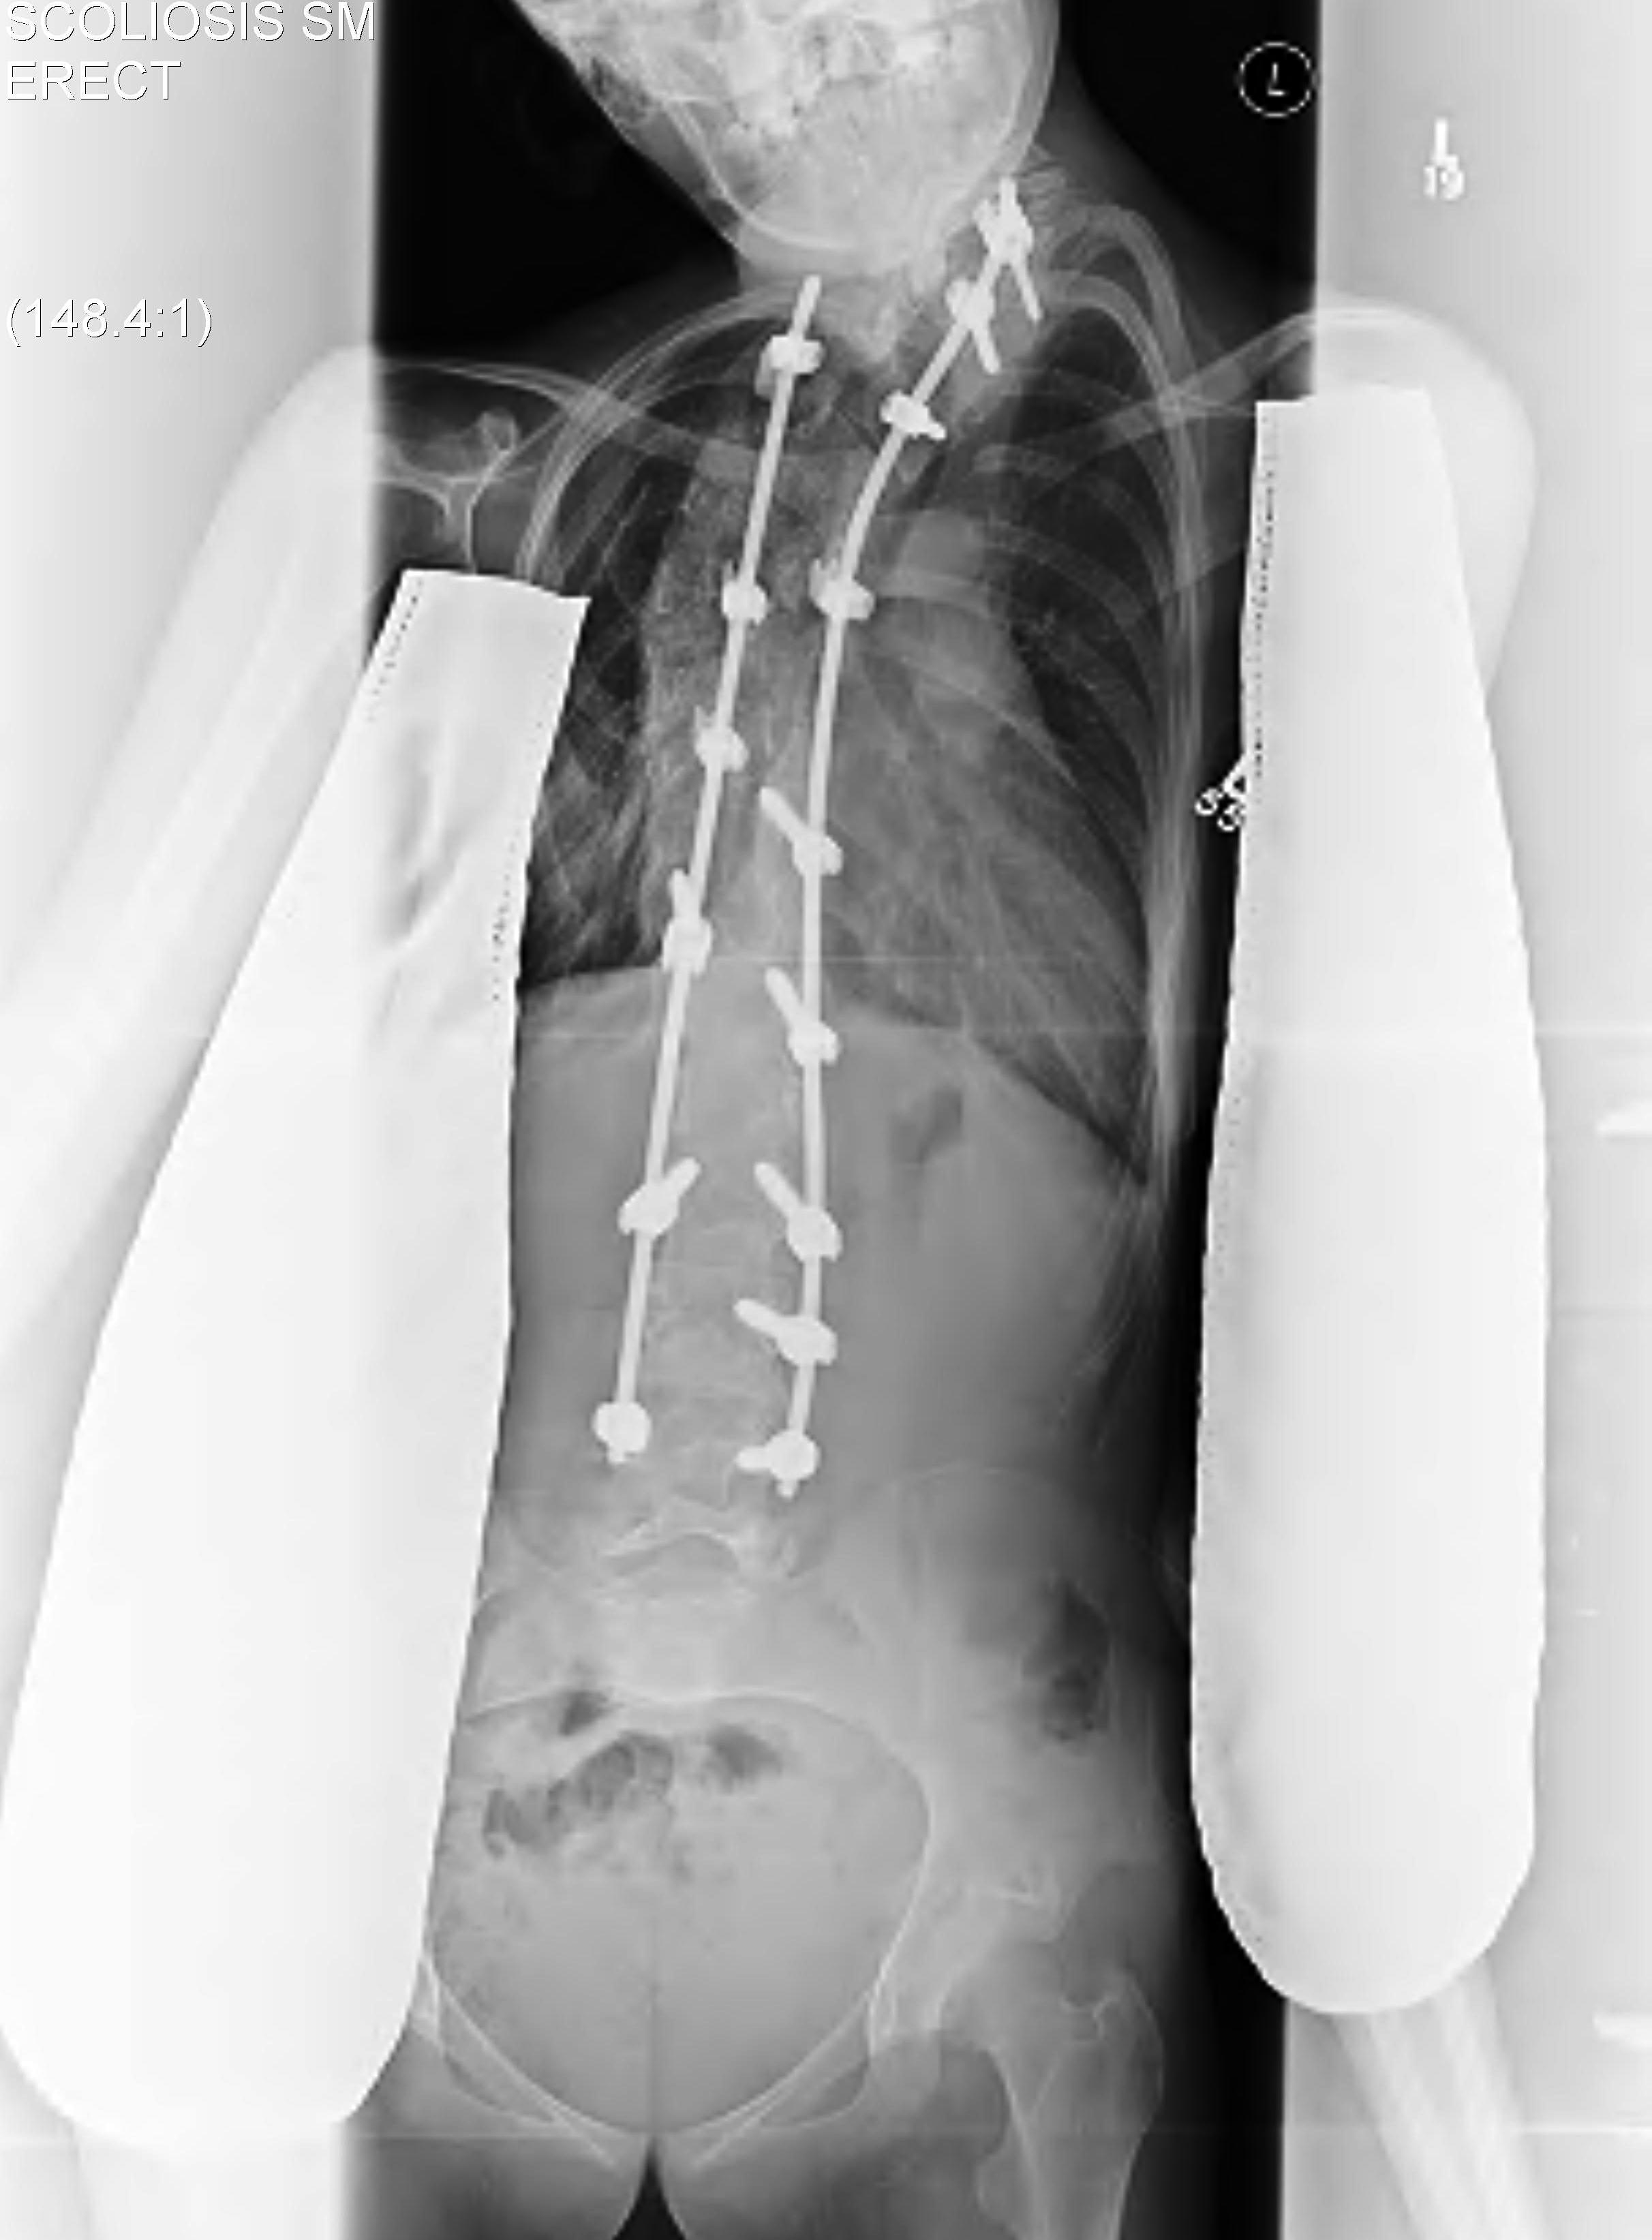 Neuromuscular Scoliosis Posterior Fusion